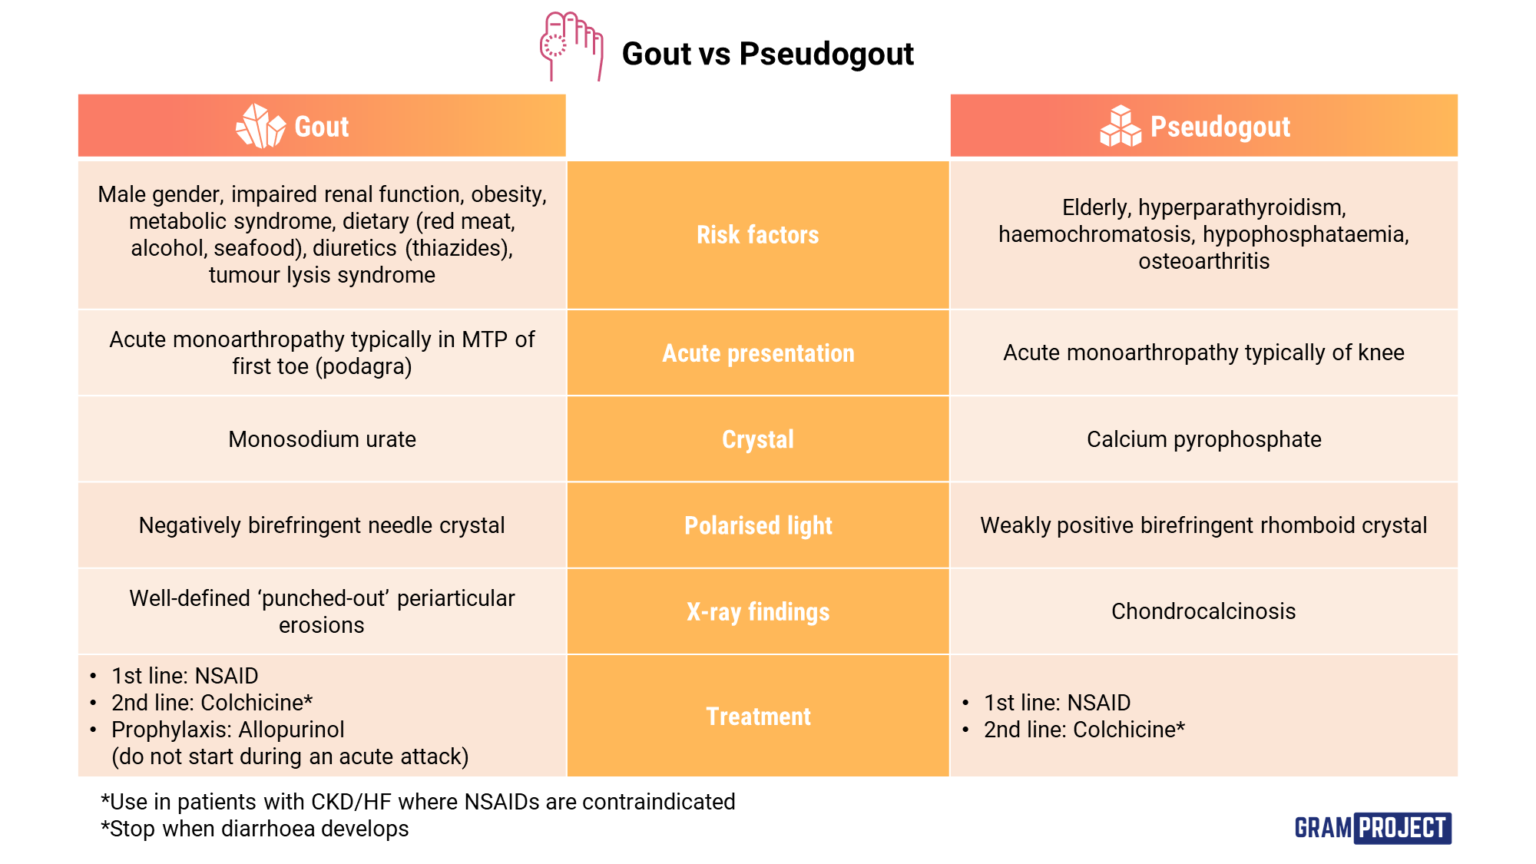 Table of comparison between gout and pseudogout